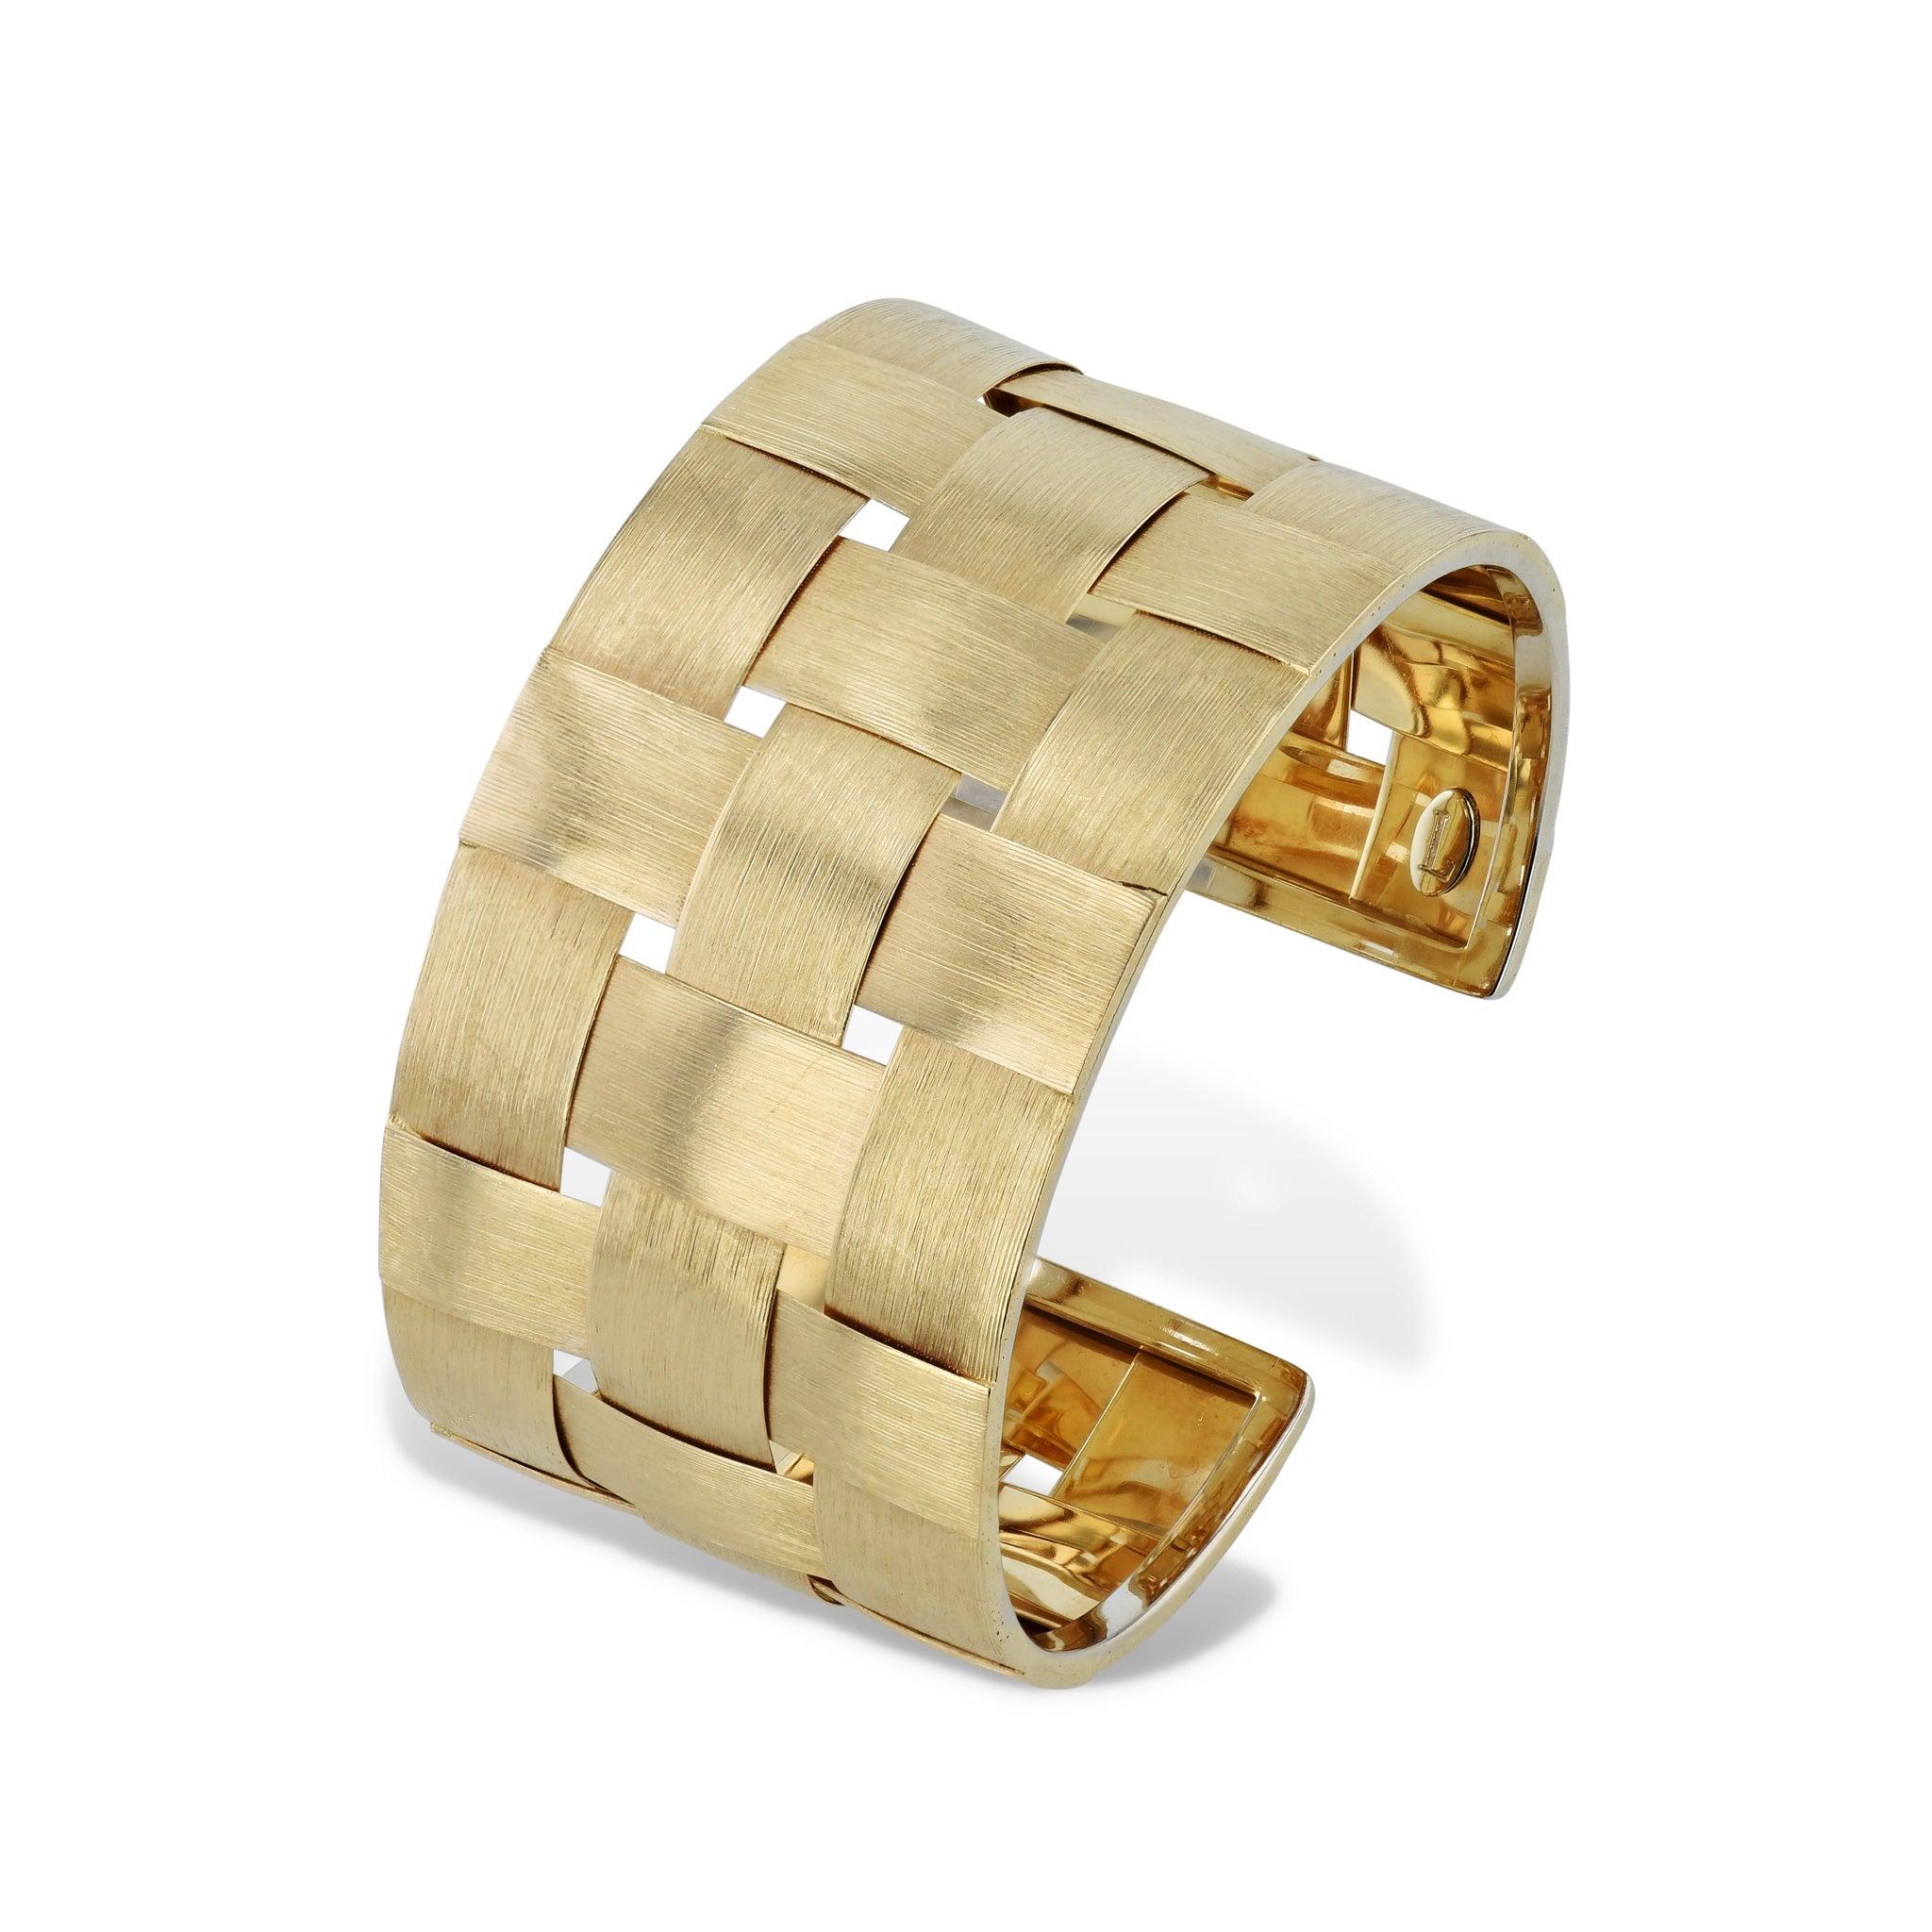 Radiate majesty and class with this 18kt Yellow gold Florentine Weave Estate Cuff Bracelet. Exquisitely crafted to 1.33 inches wide, it's a stunningly beautiful Italian-made accessory that sets you apart from the crowd. Dare to be different with the